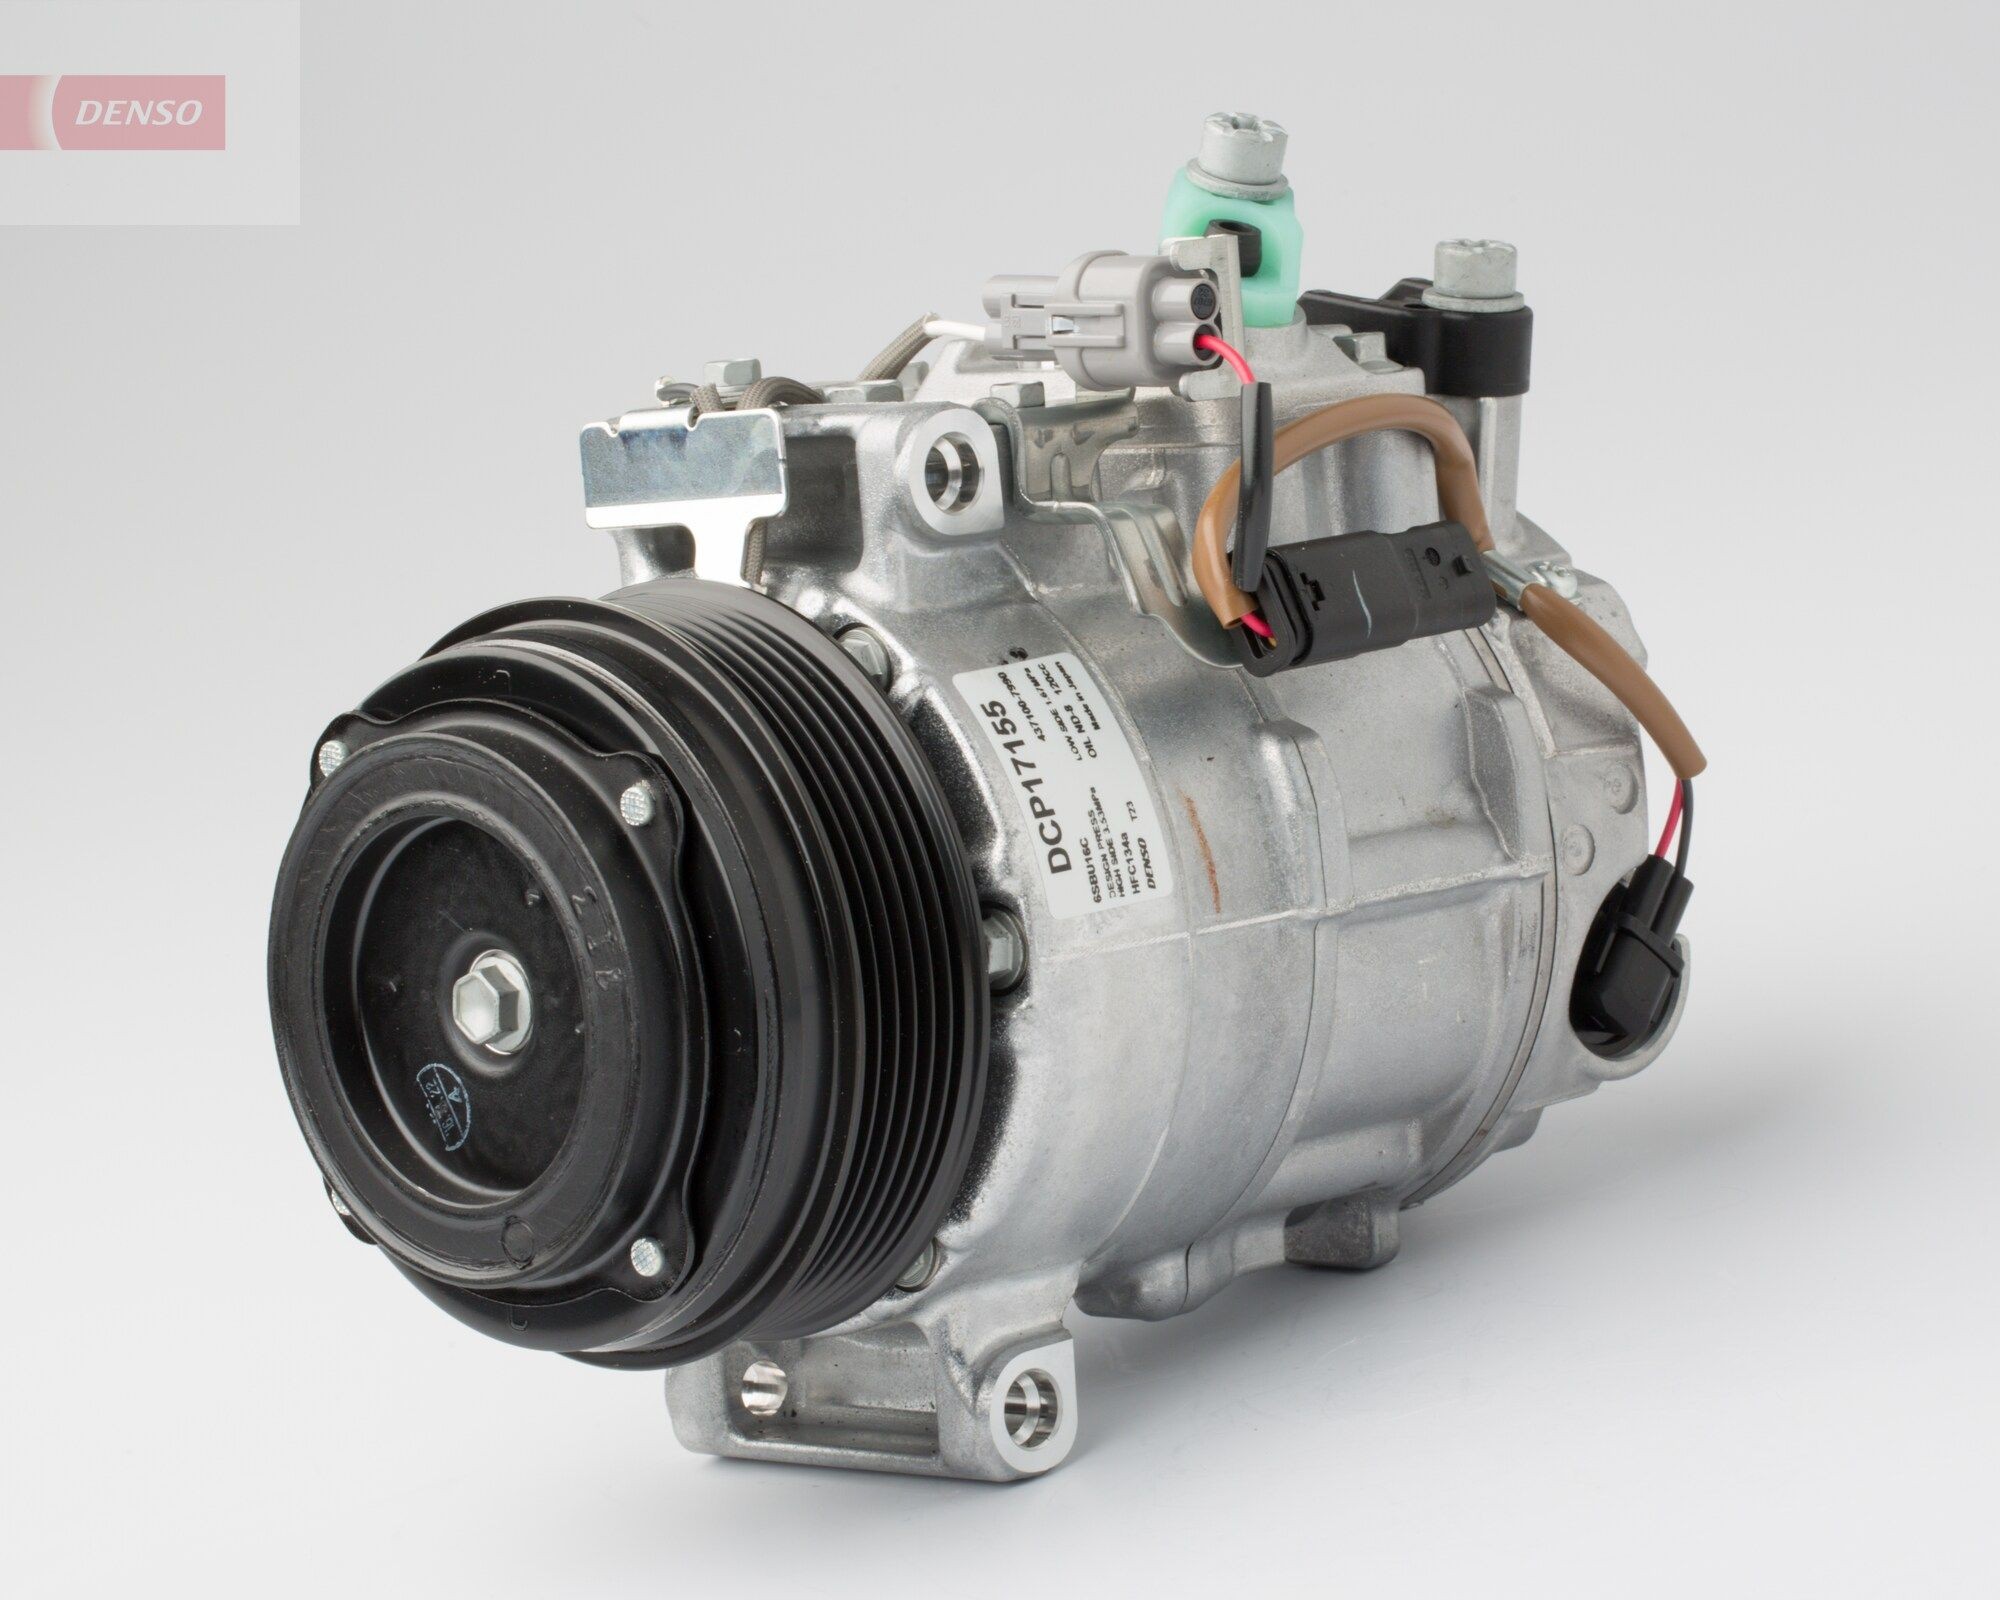 DENSO DCP17155 Air conditioning compressor 000 830 2600